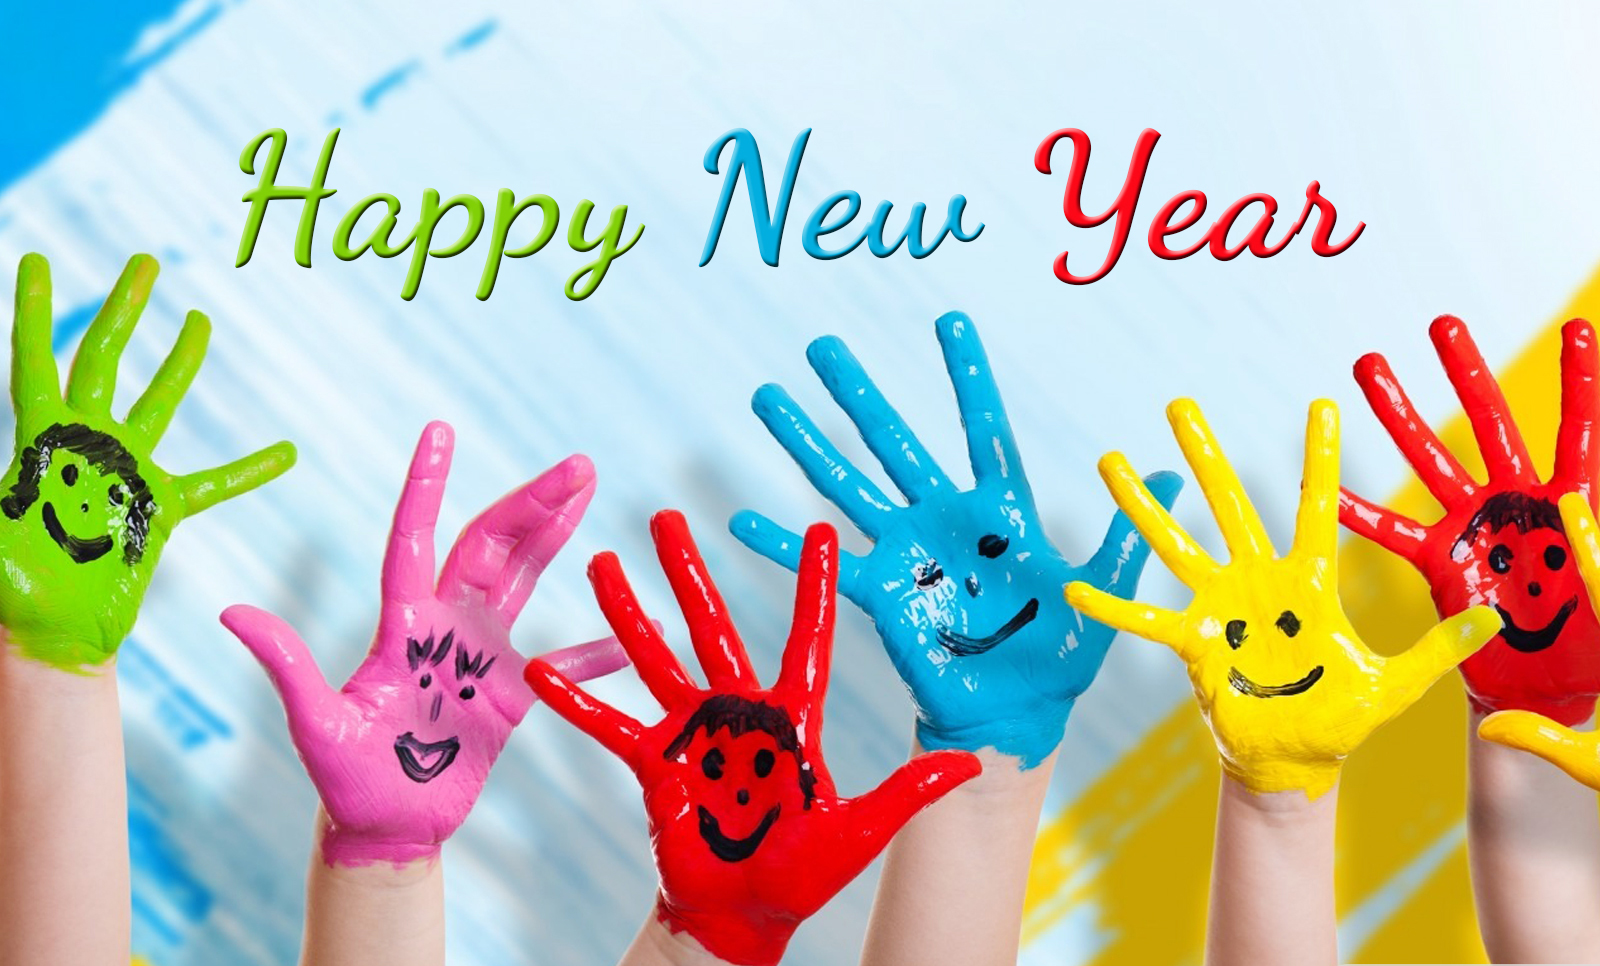 Happy New Year 2021 Image, Quotes, Wishes, Messages, Wallpapers